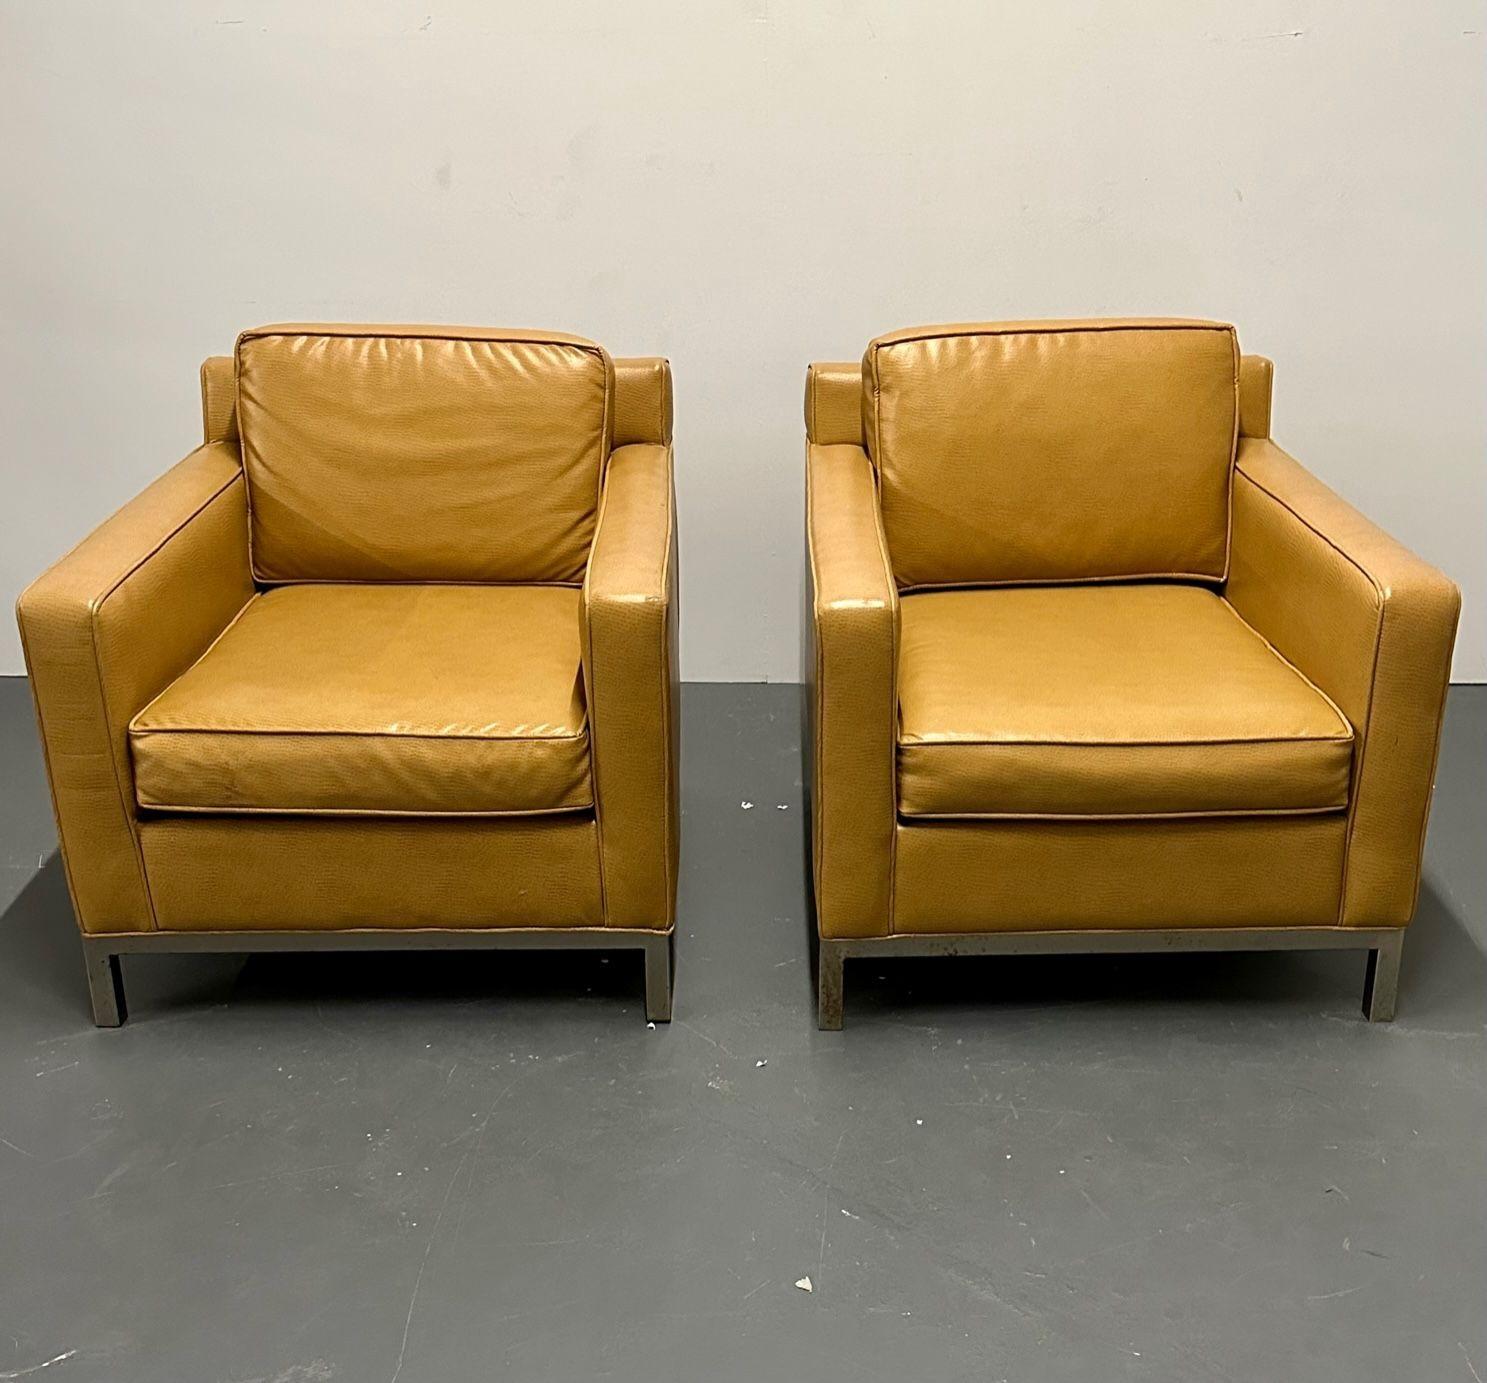 American Mid-Century Modern Lounge Chairs, Chrome, Leather, Manner Baughman In Good Condition For Sale In Stamford, CT